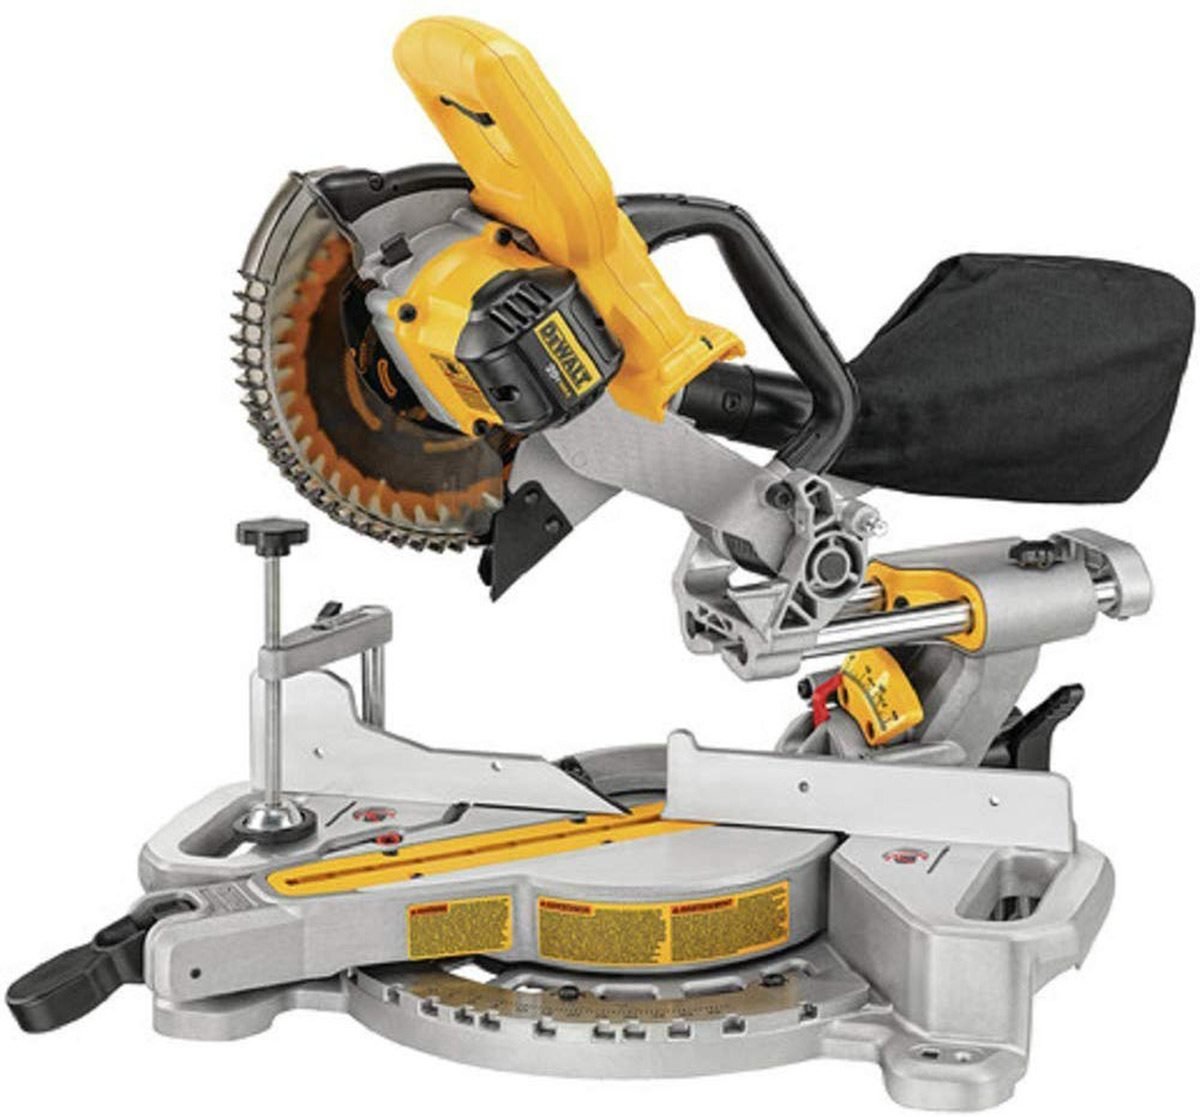 What Is a Chop Saw?